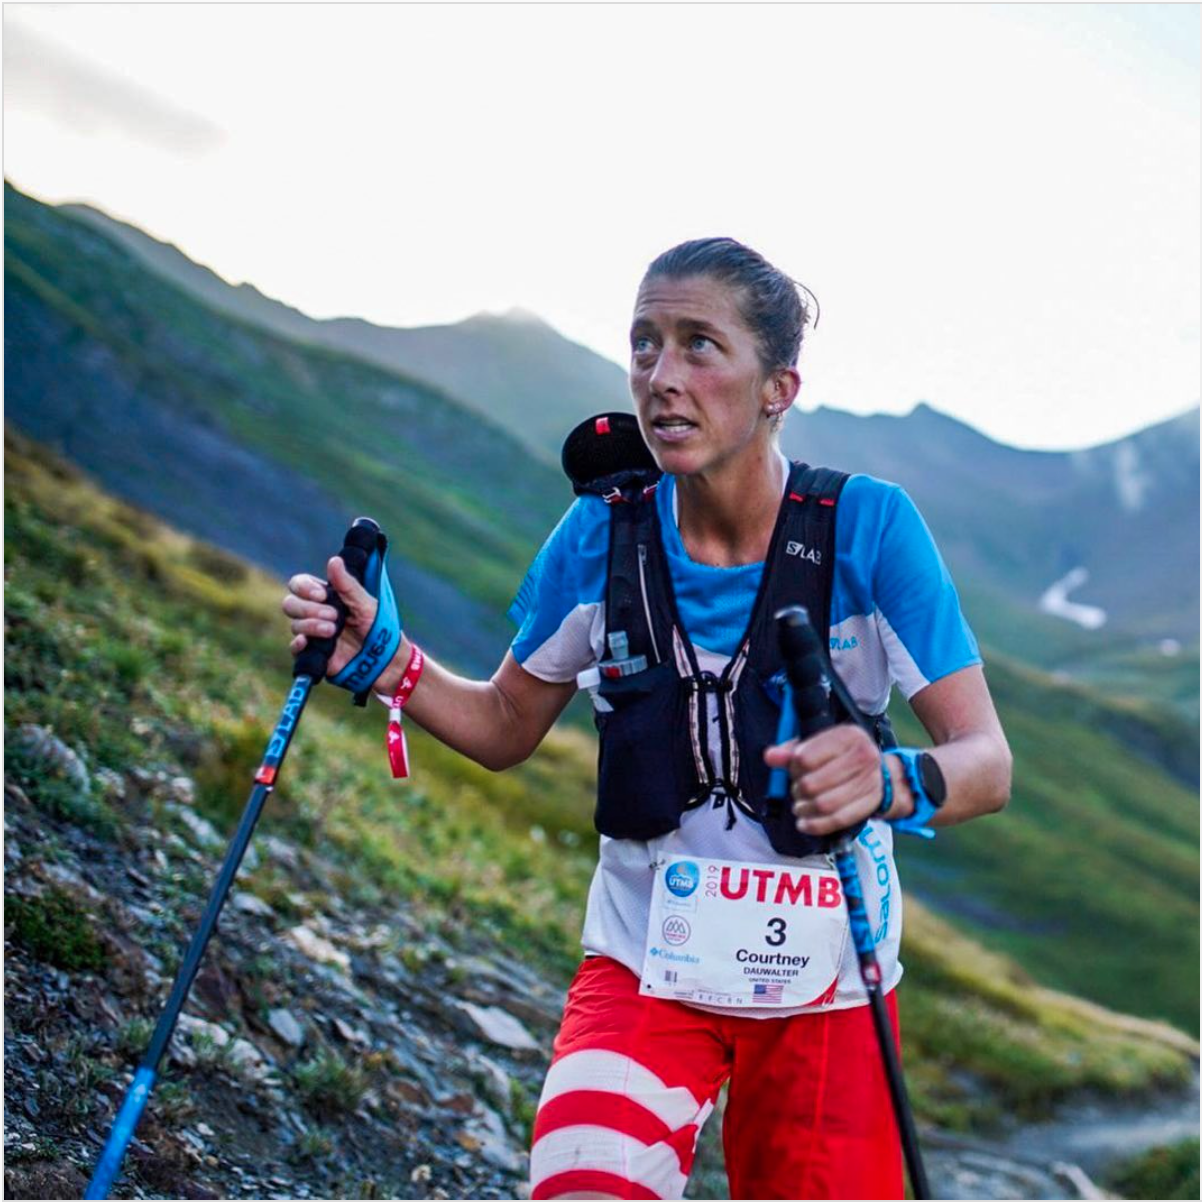 Courtney looks up while trekking up a mountain during UTMB. She's holding her hiking poles in either hand and wearing a hydration vest.